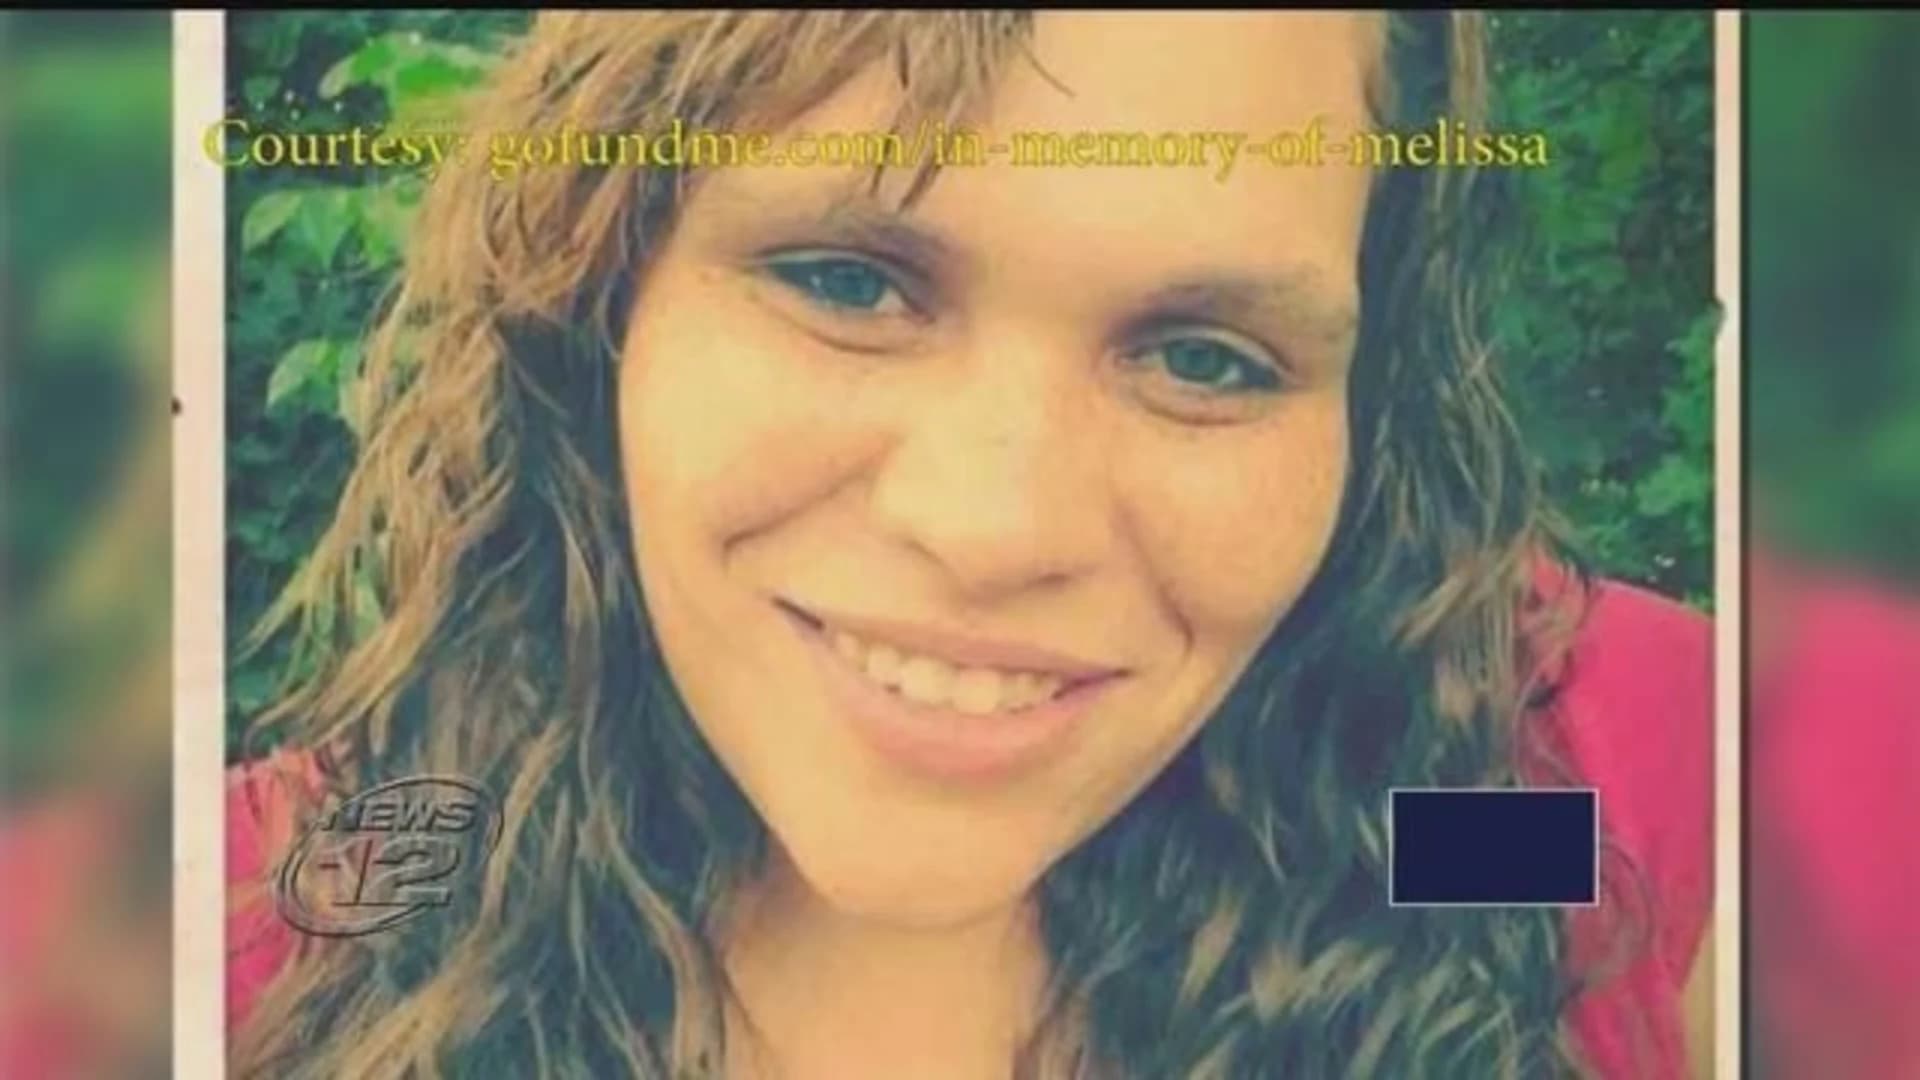 ‘The children want their mommy’: Family mourns loss of woman struck in Garnerville